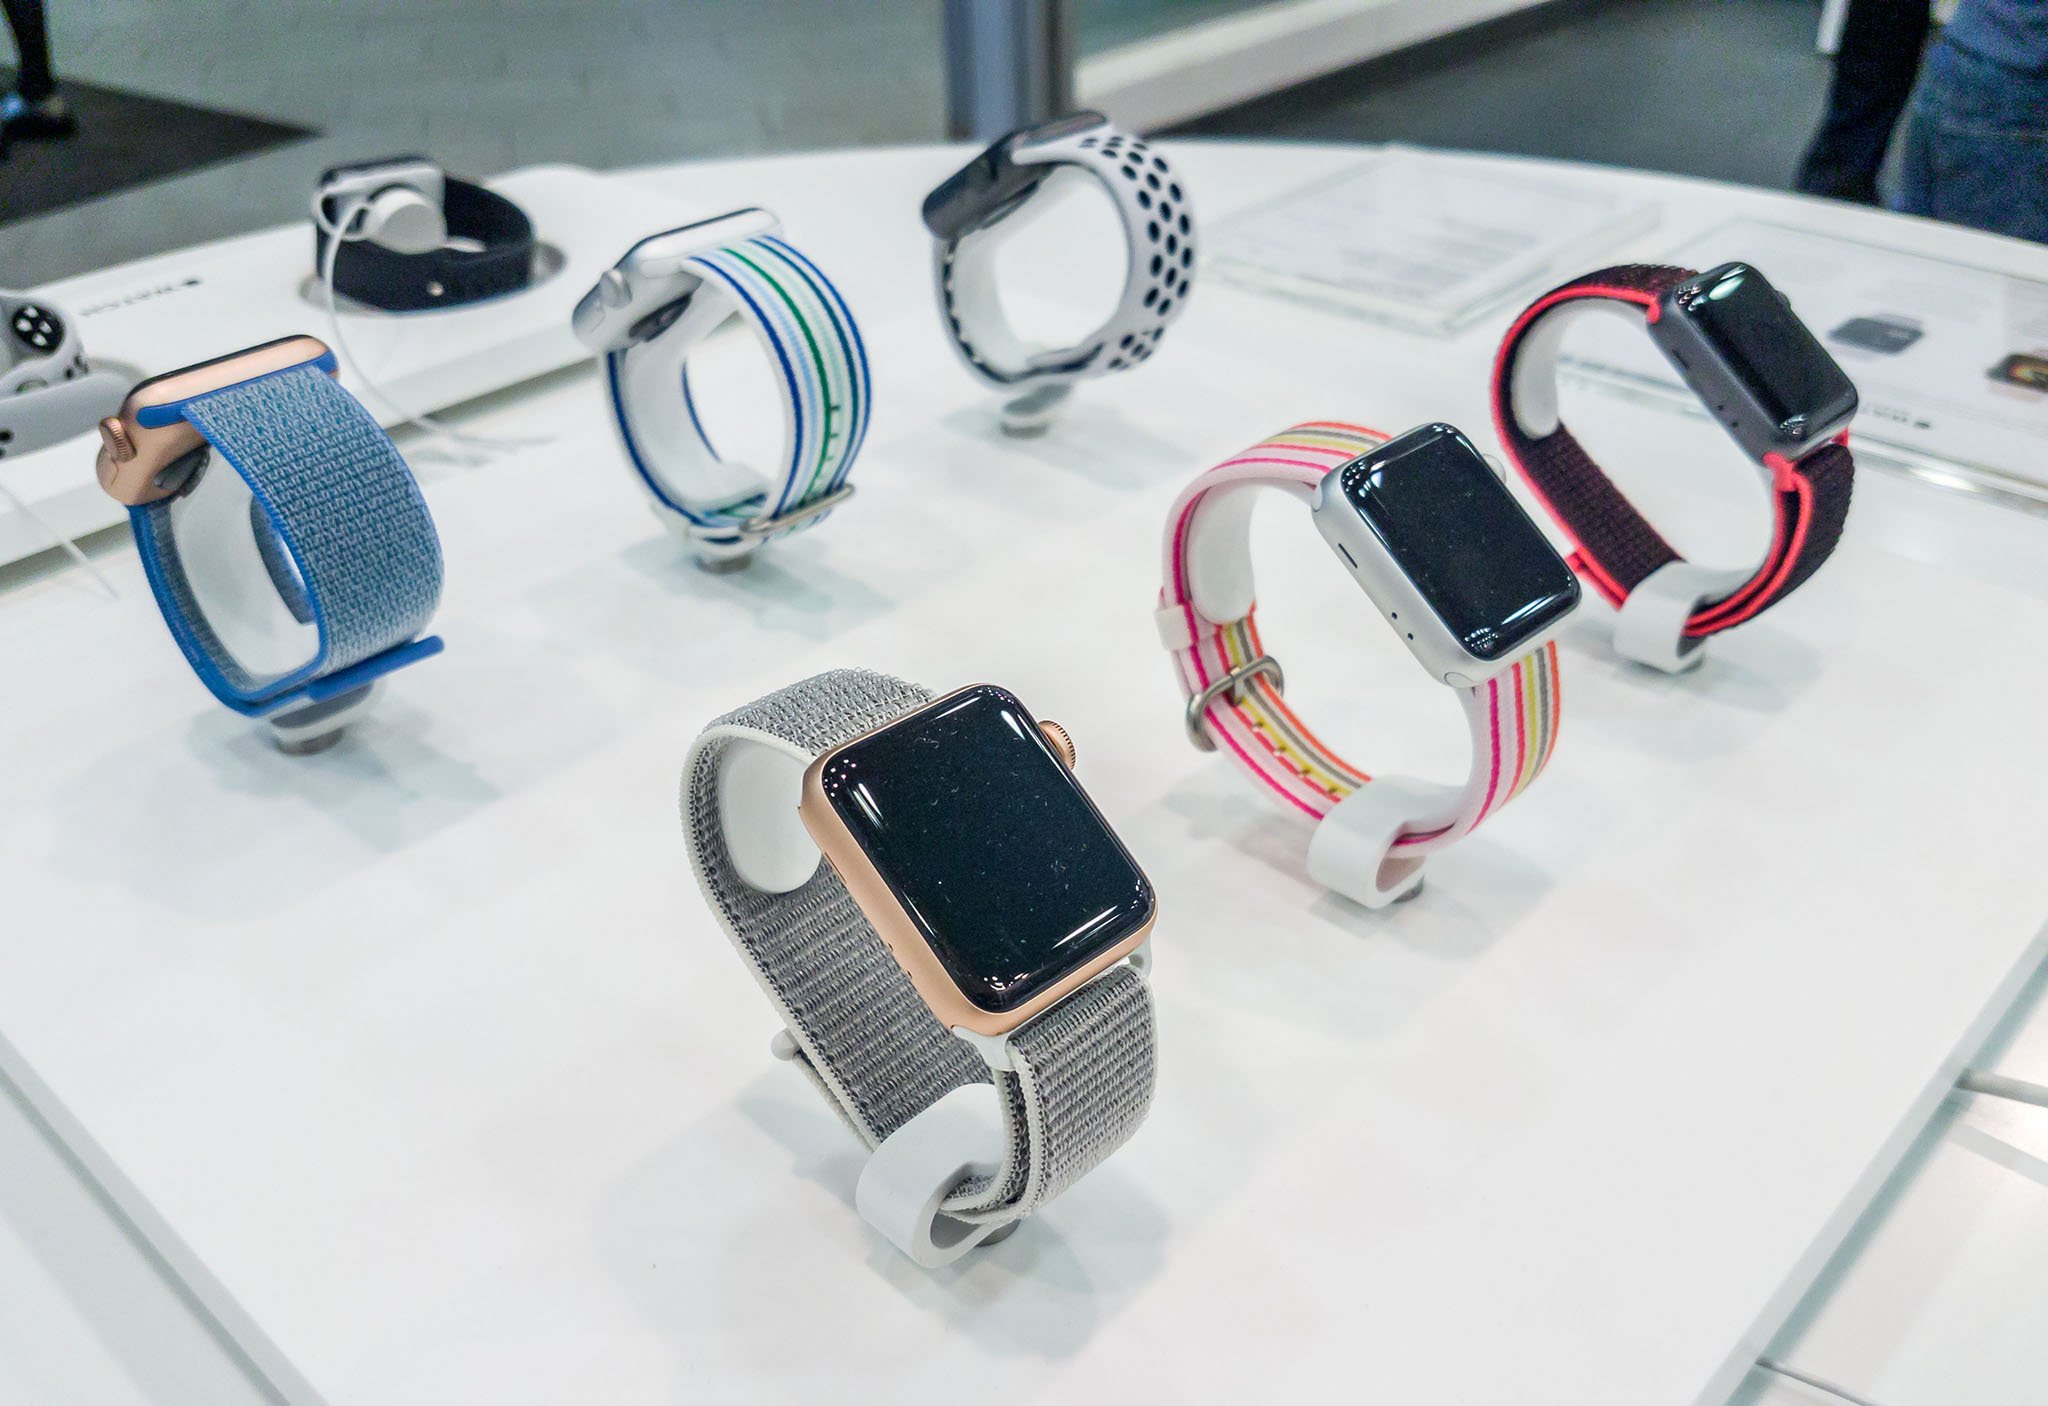 You can change the strap of your Apple Watch to match every outfit in your closet